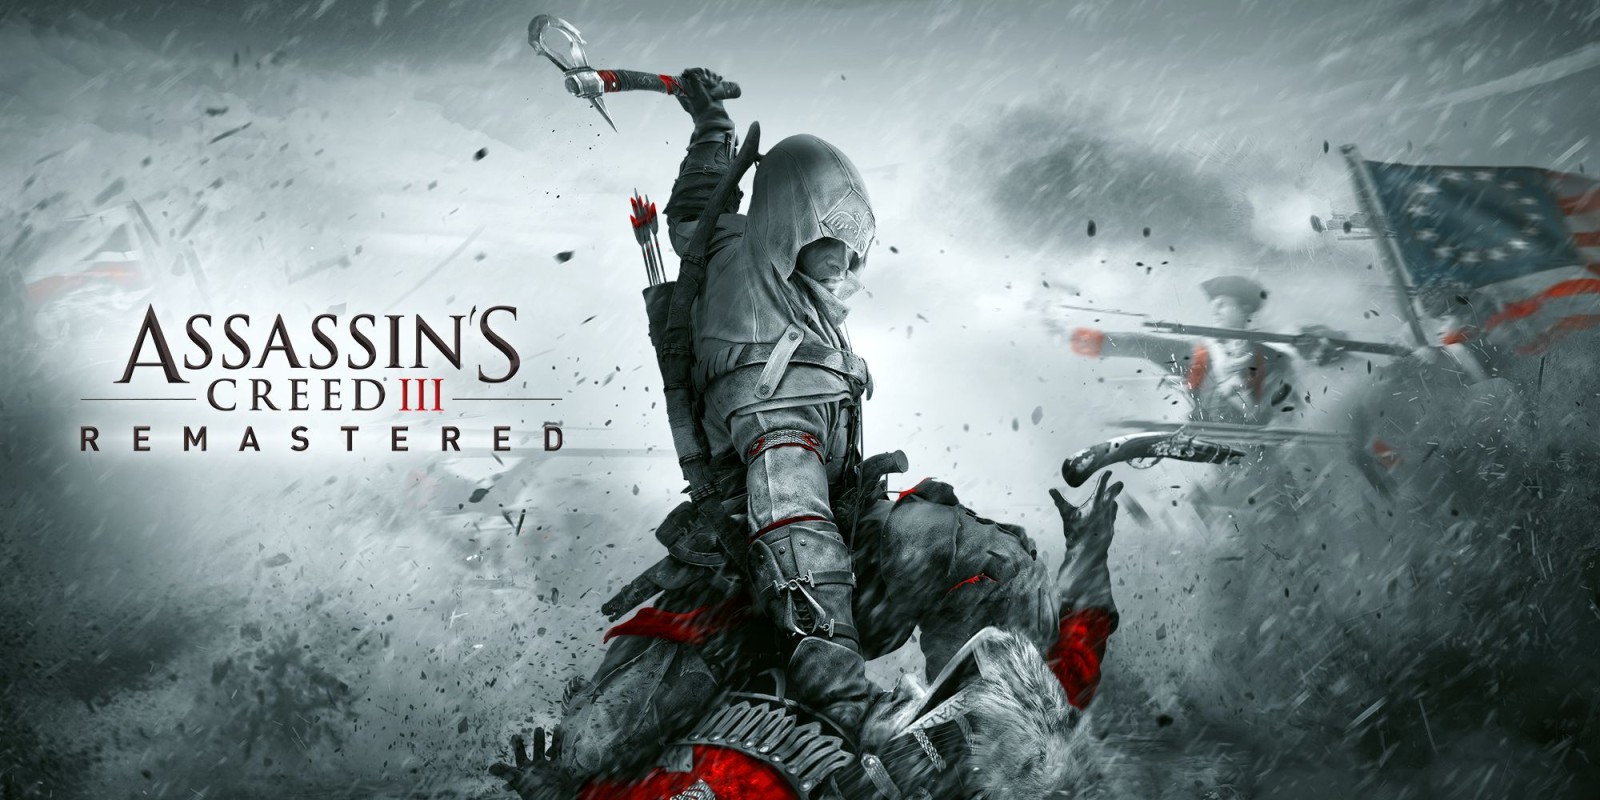 Assassins Creed 3 free Download PC Game (Full Version)